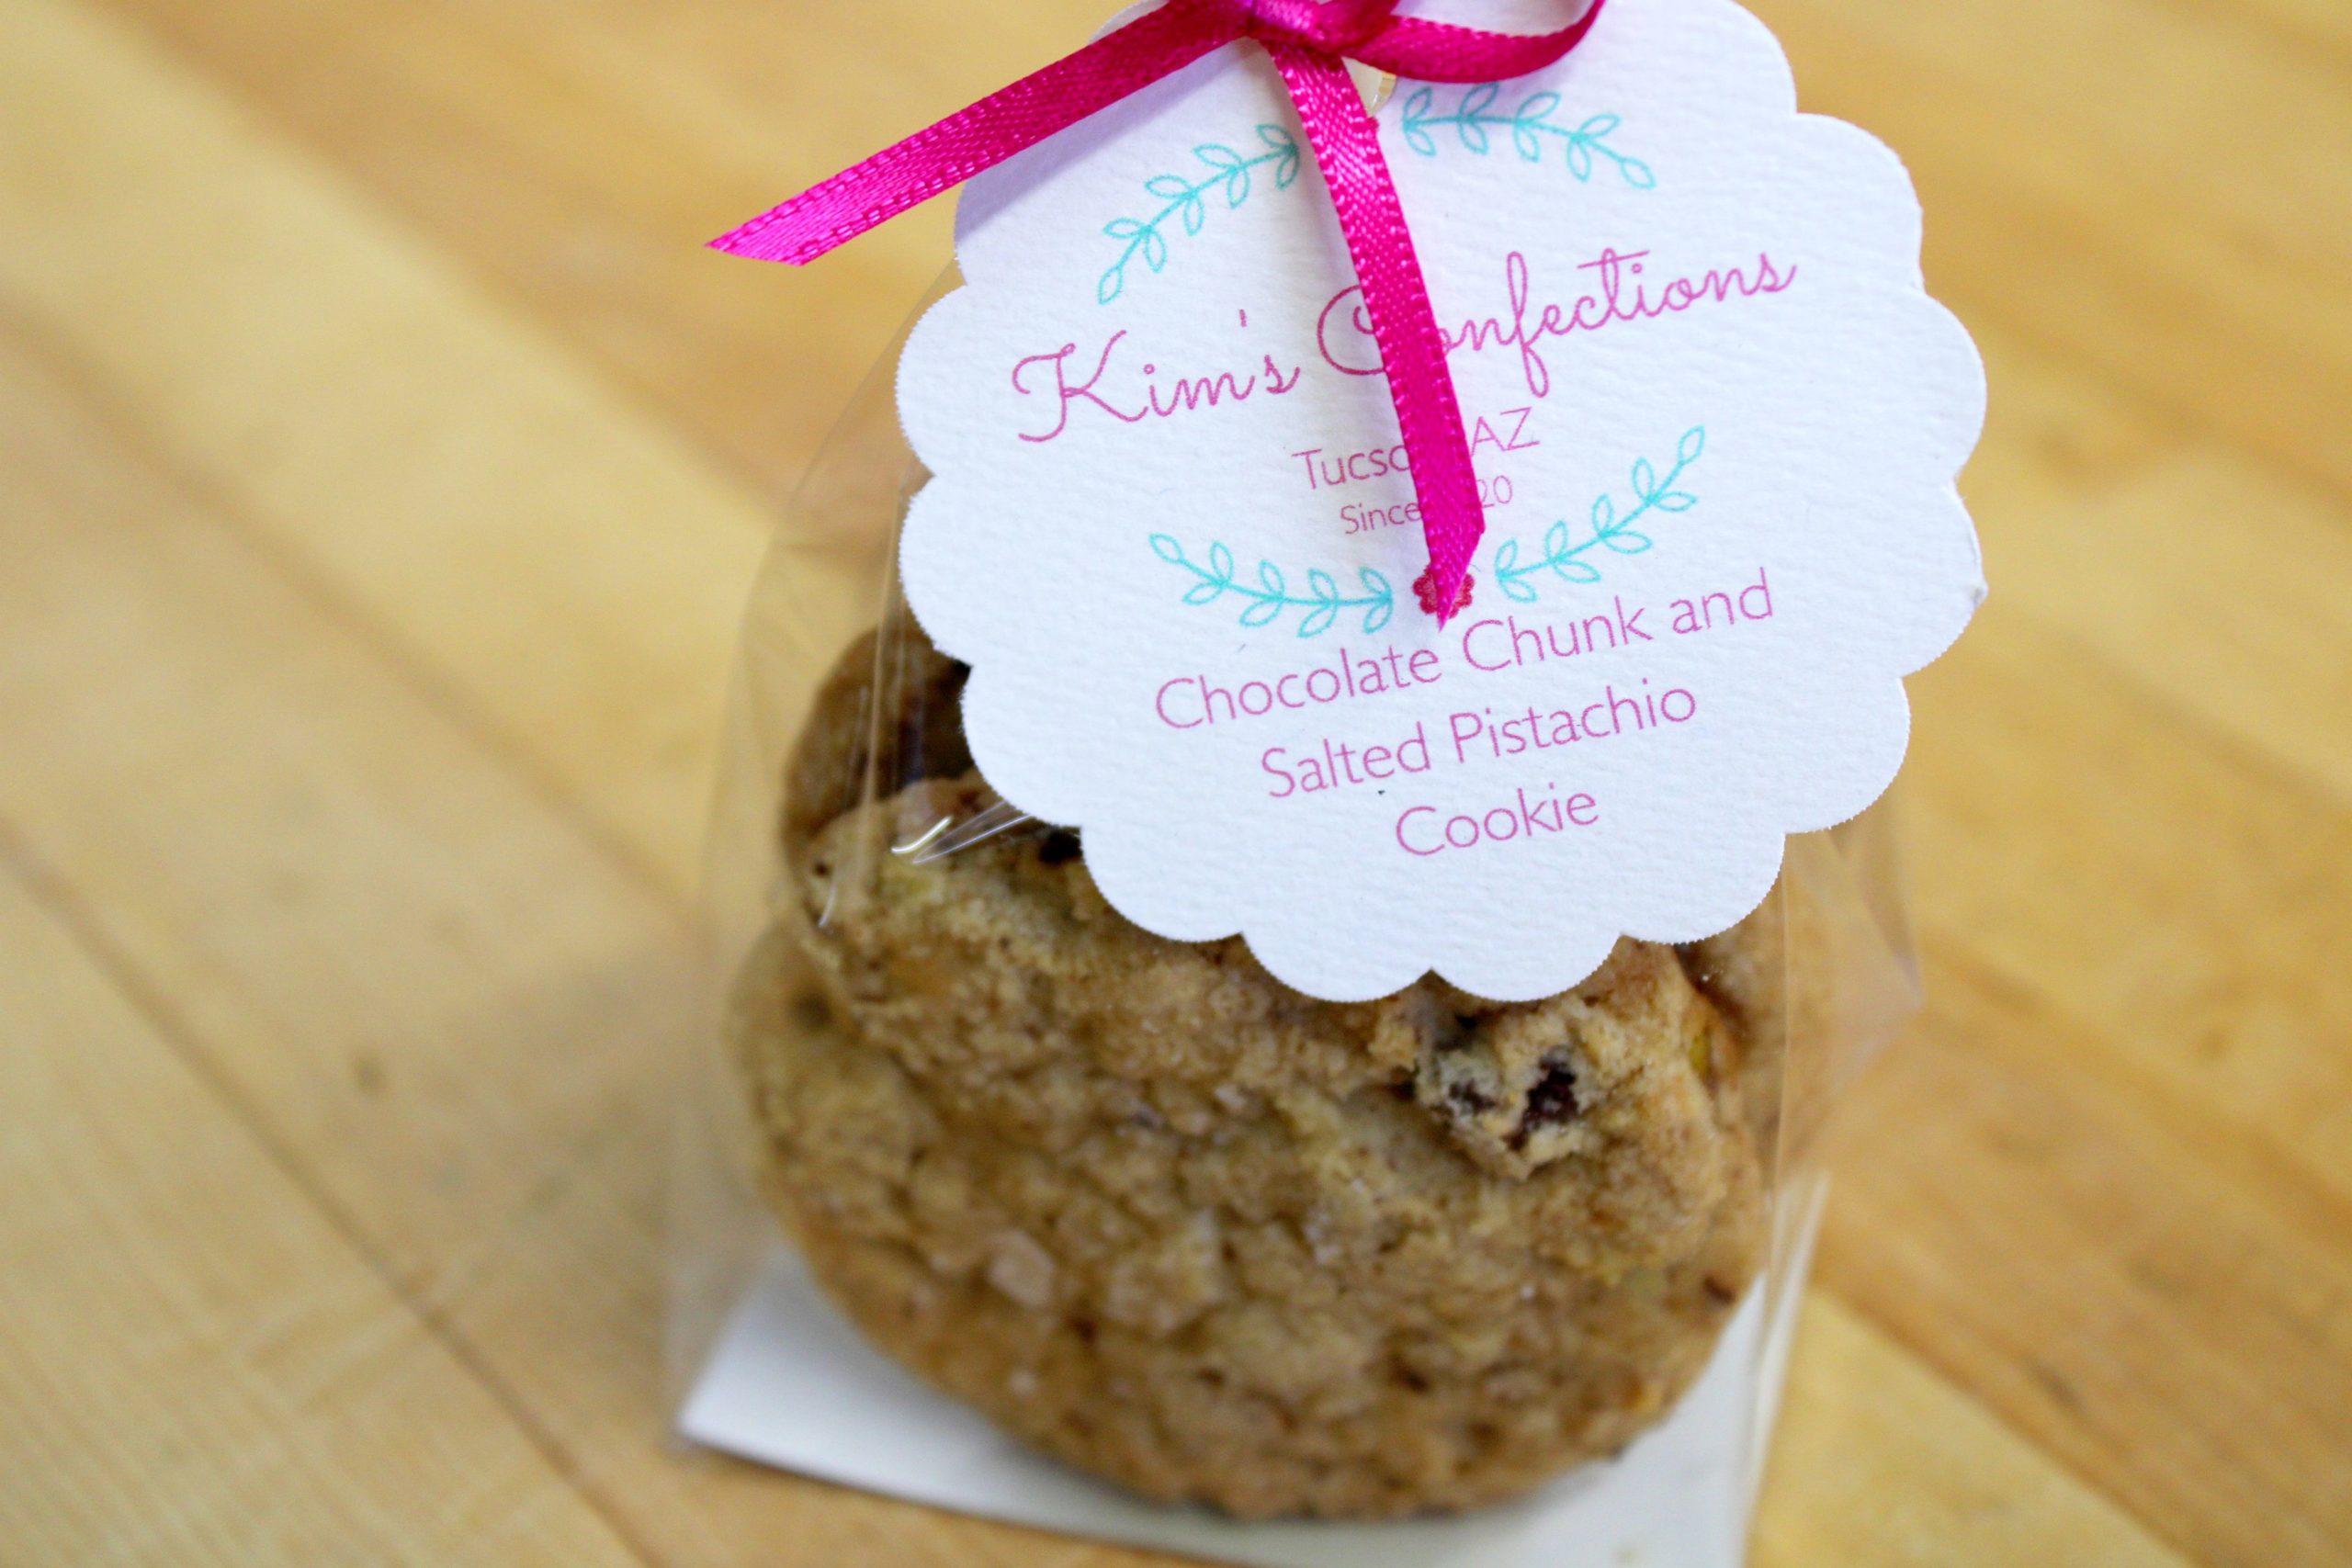 Chocolate Chunk Salted Pistachio Cookies at Kim’s Confections